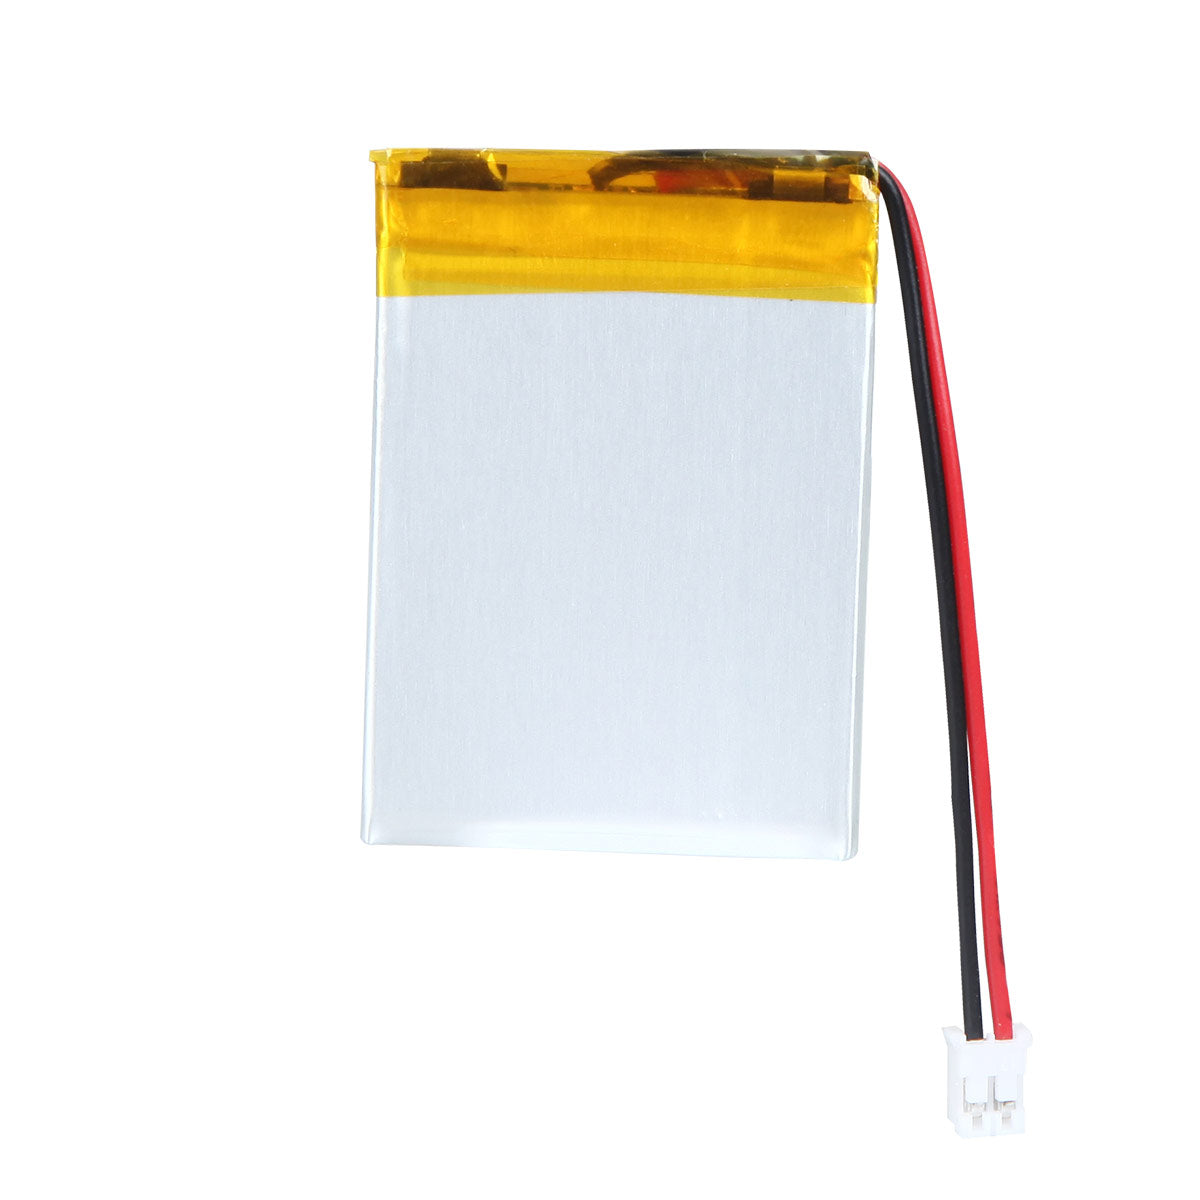 YDL 3.7V 300mAh 303040 Rechargeable Lipo Battery with JST Connector - YDL Battery